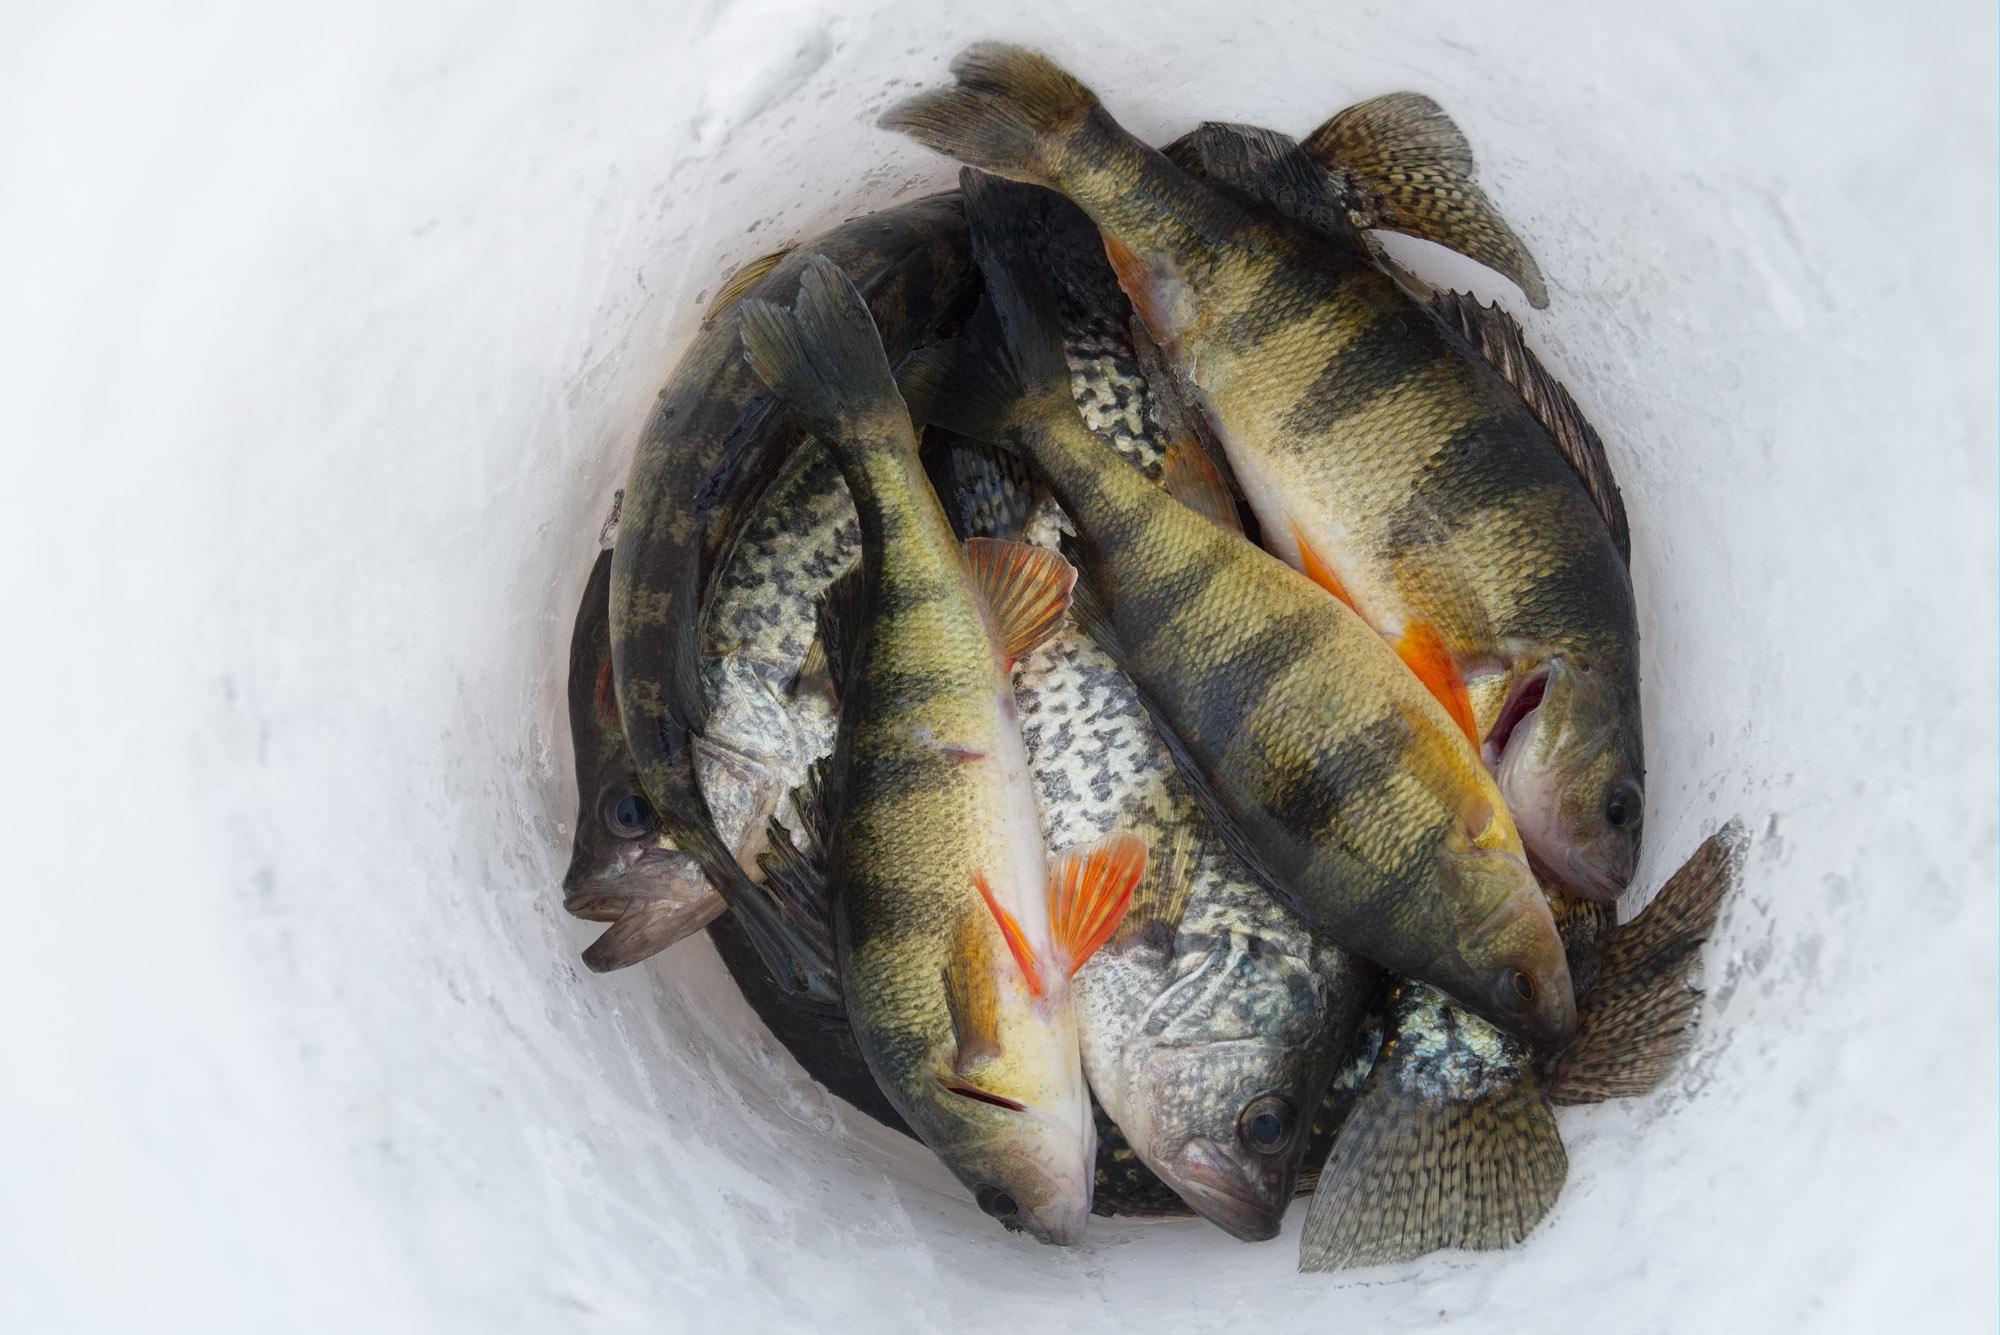 Drewsville & Beyond - The catch of a day of ice fishing at Hoyt's Landing,...